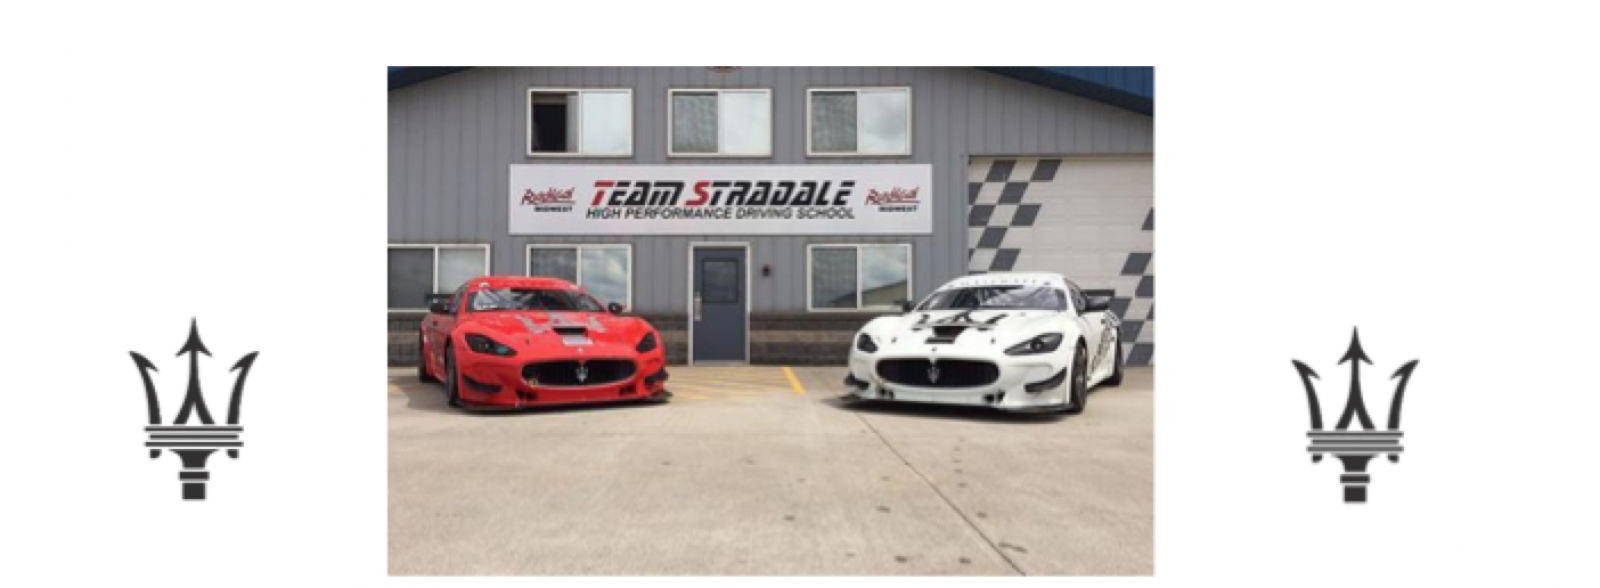 FOR SALE- TWO (2) MASERATI GT4 RACE CARS